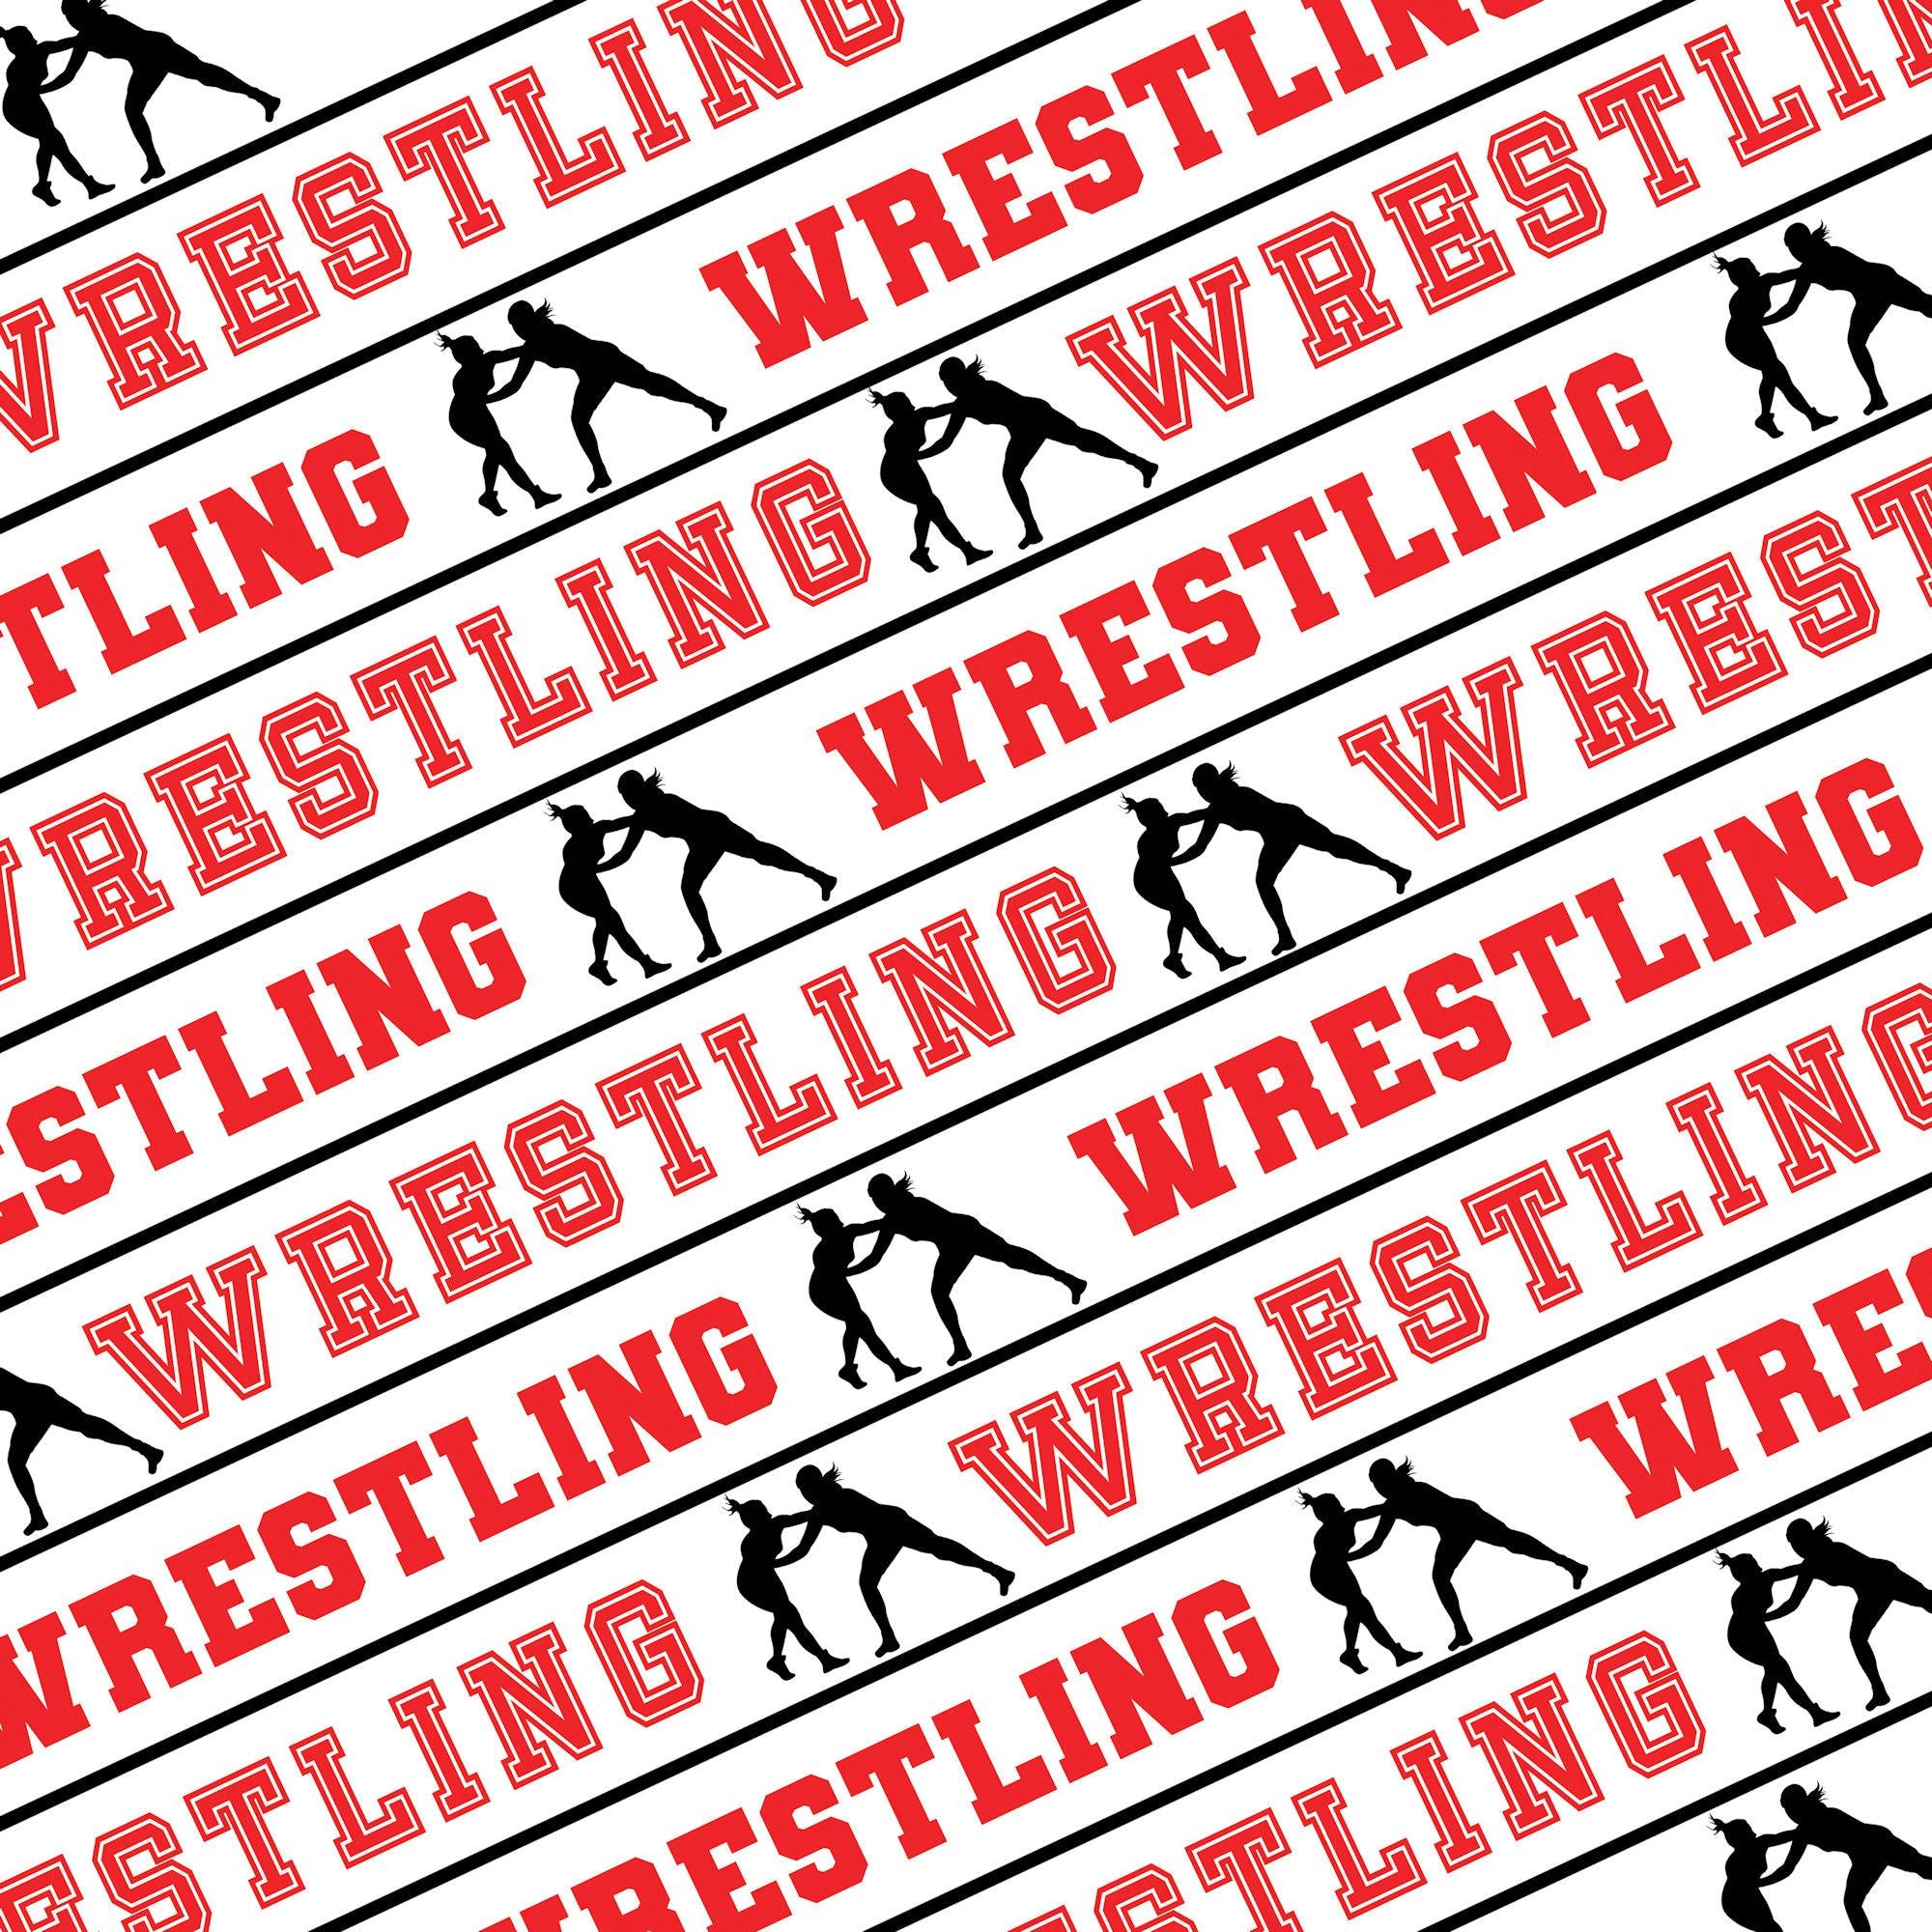 Female Wrestling Collection Wrestling On The Mat 12 x 12 Double-Sided Scrapbook Paper by SSC Designs - Scrapbook Supply Companies